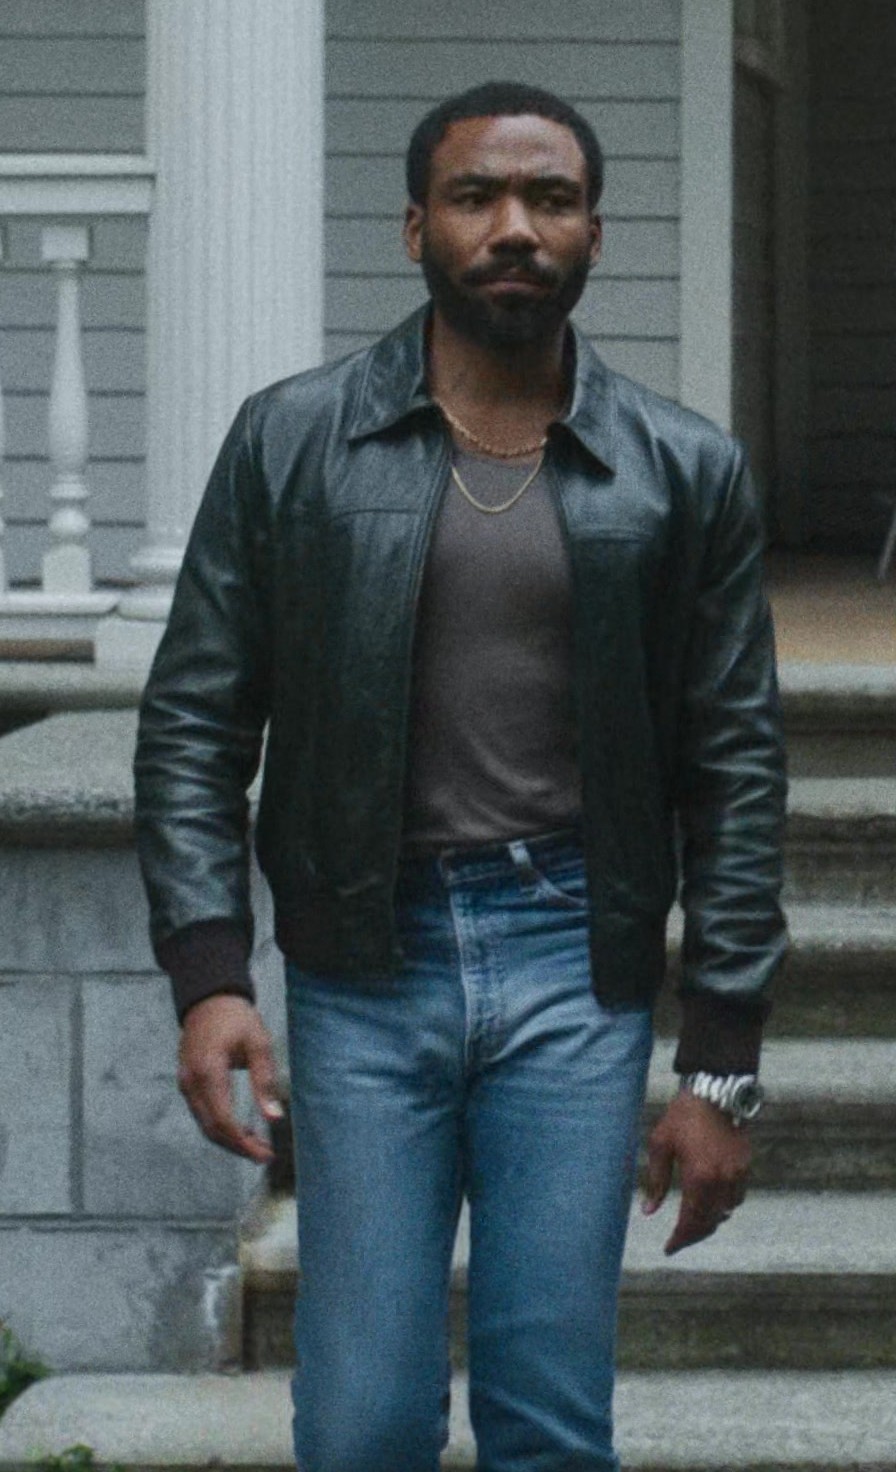 Worn on Mr. & Mrs. Smith TV Show - Black Leather Bomber Jacket With Collar Worn by Donald Glover as John Smith